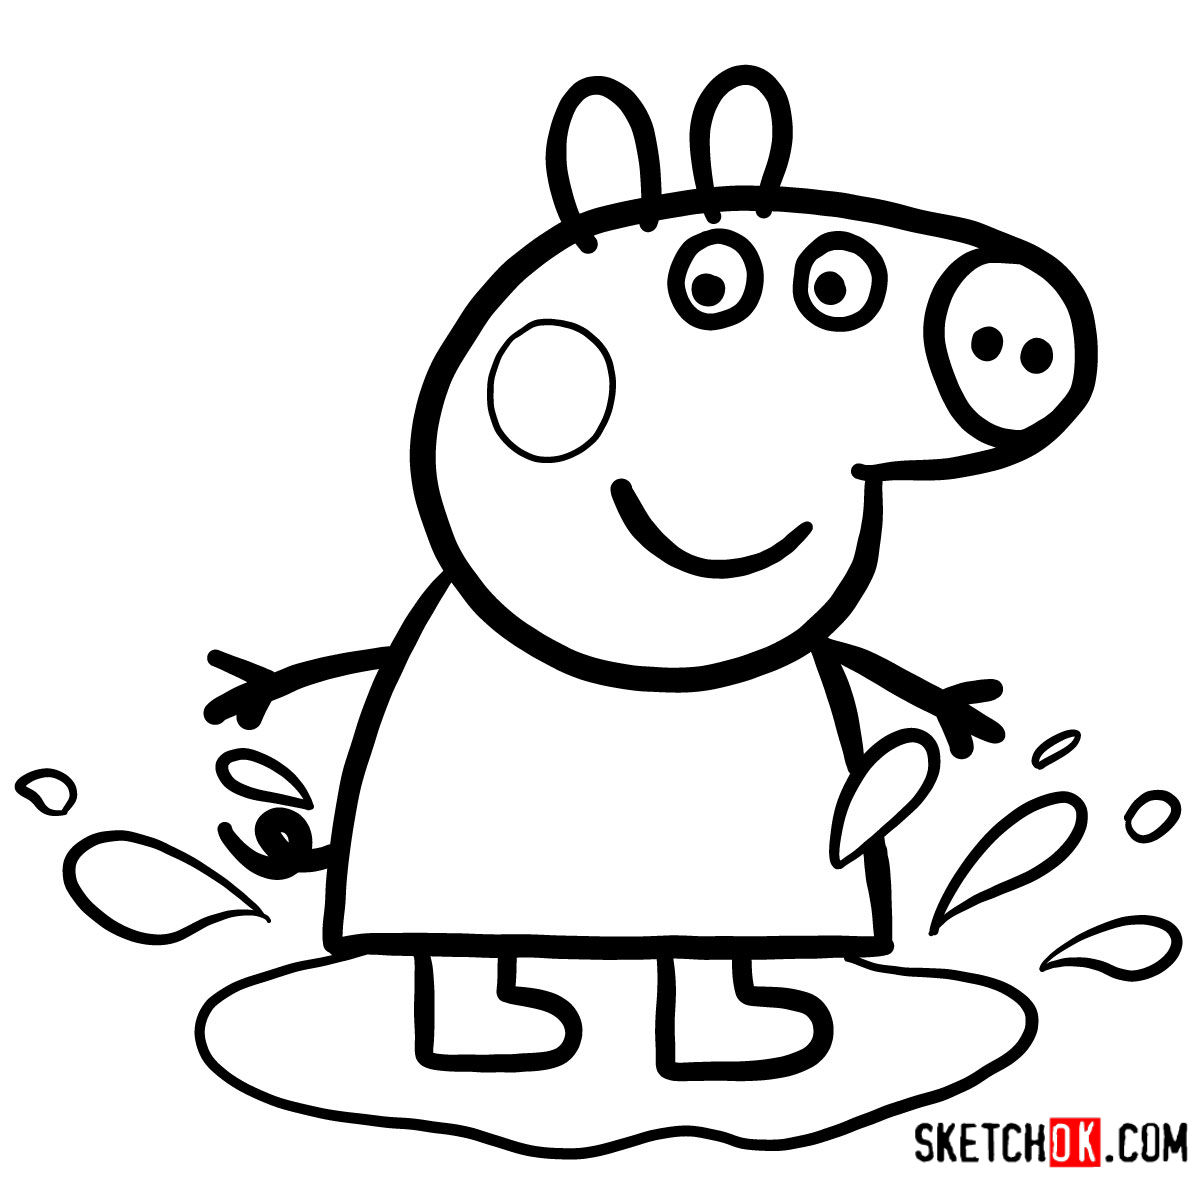 How to draw Peppa Pig in the mud puddle